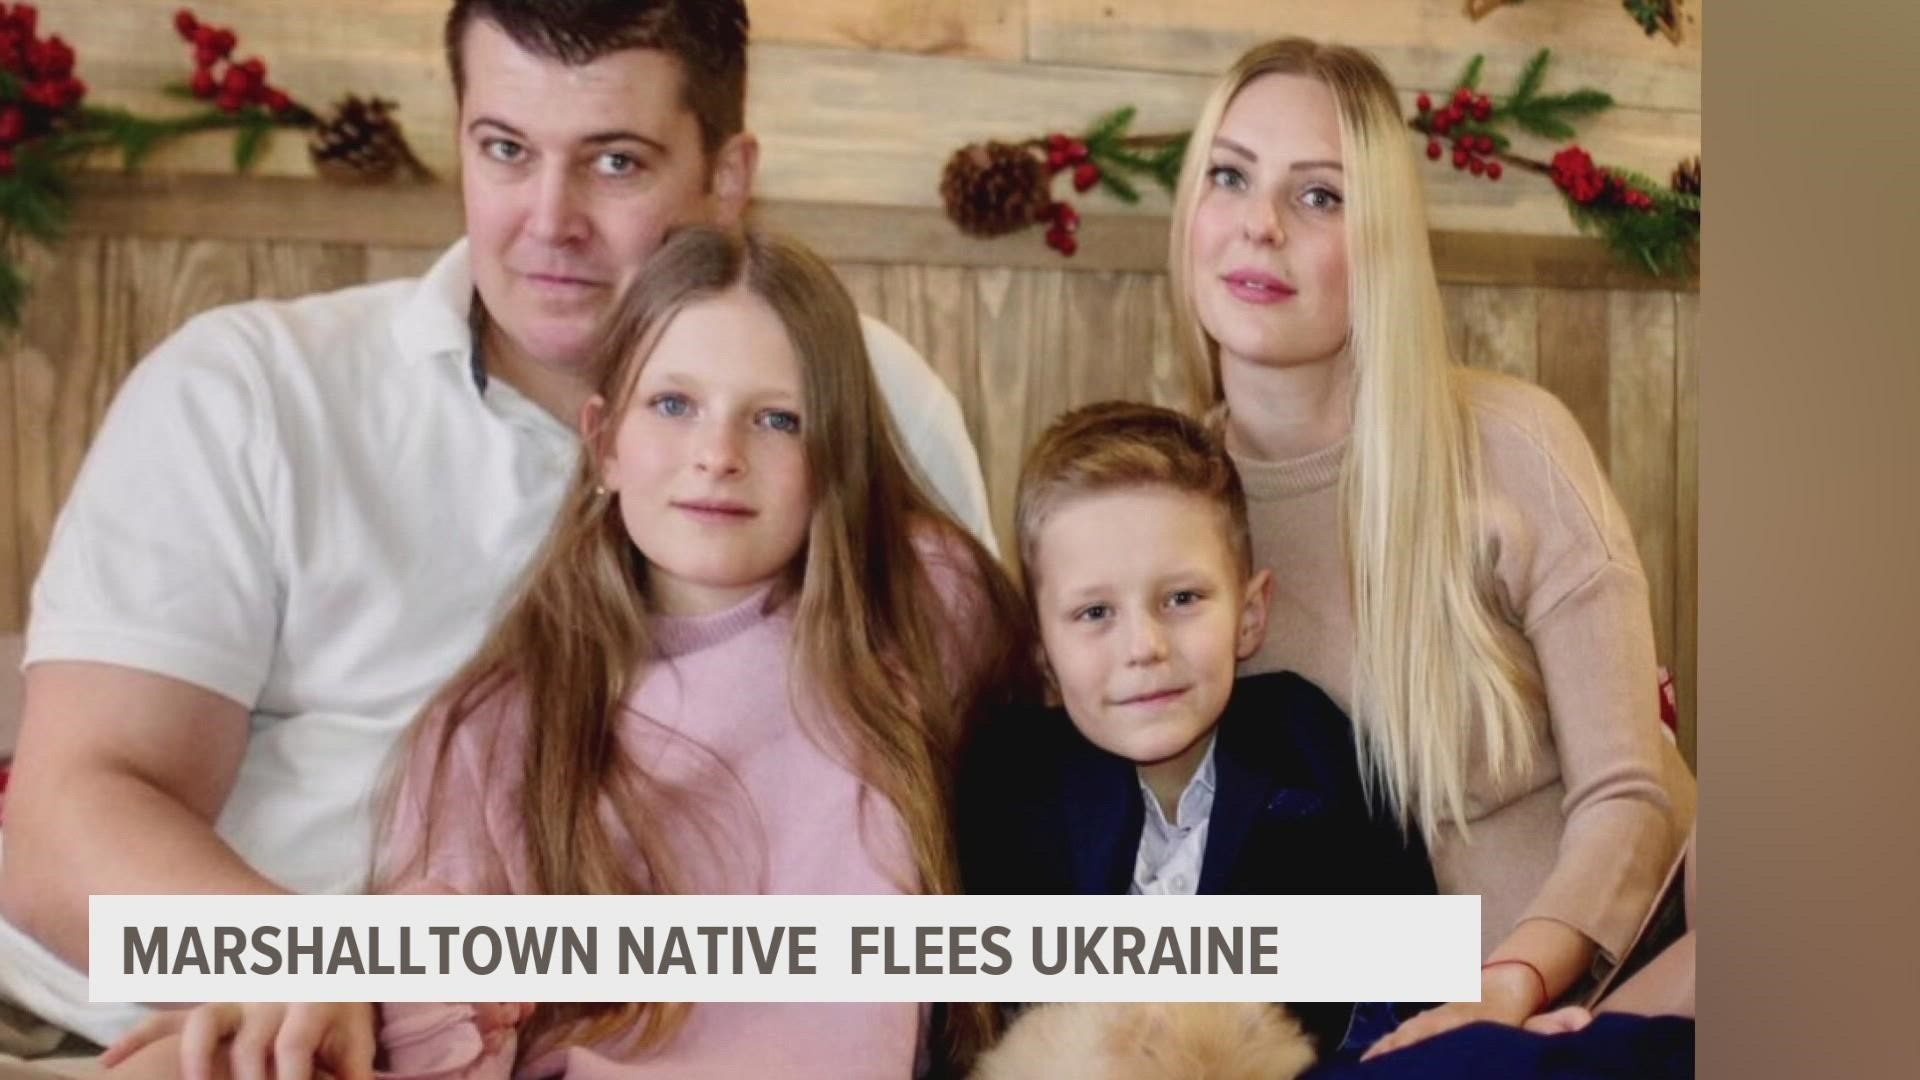 One Marshalltown native was able to flee Ukraine after his city began getting bombed. He and his family are currently in Romania.